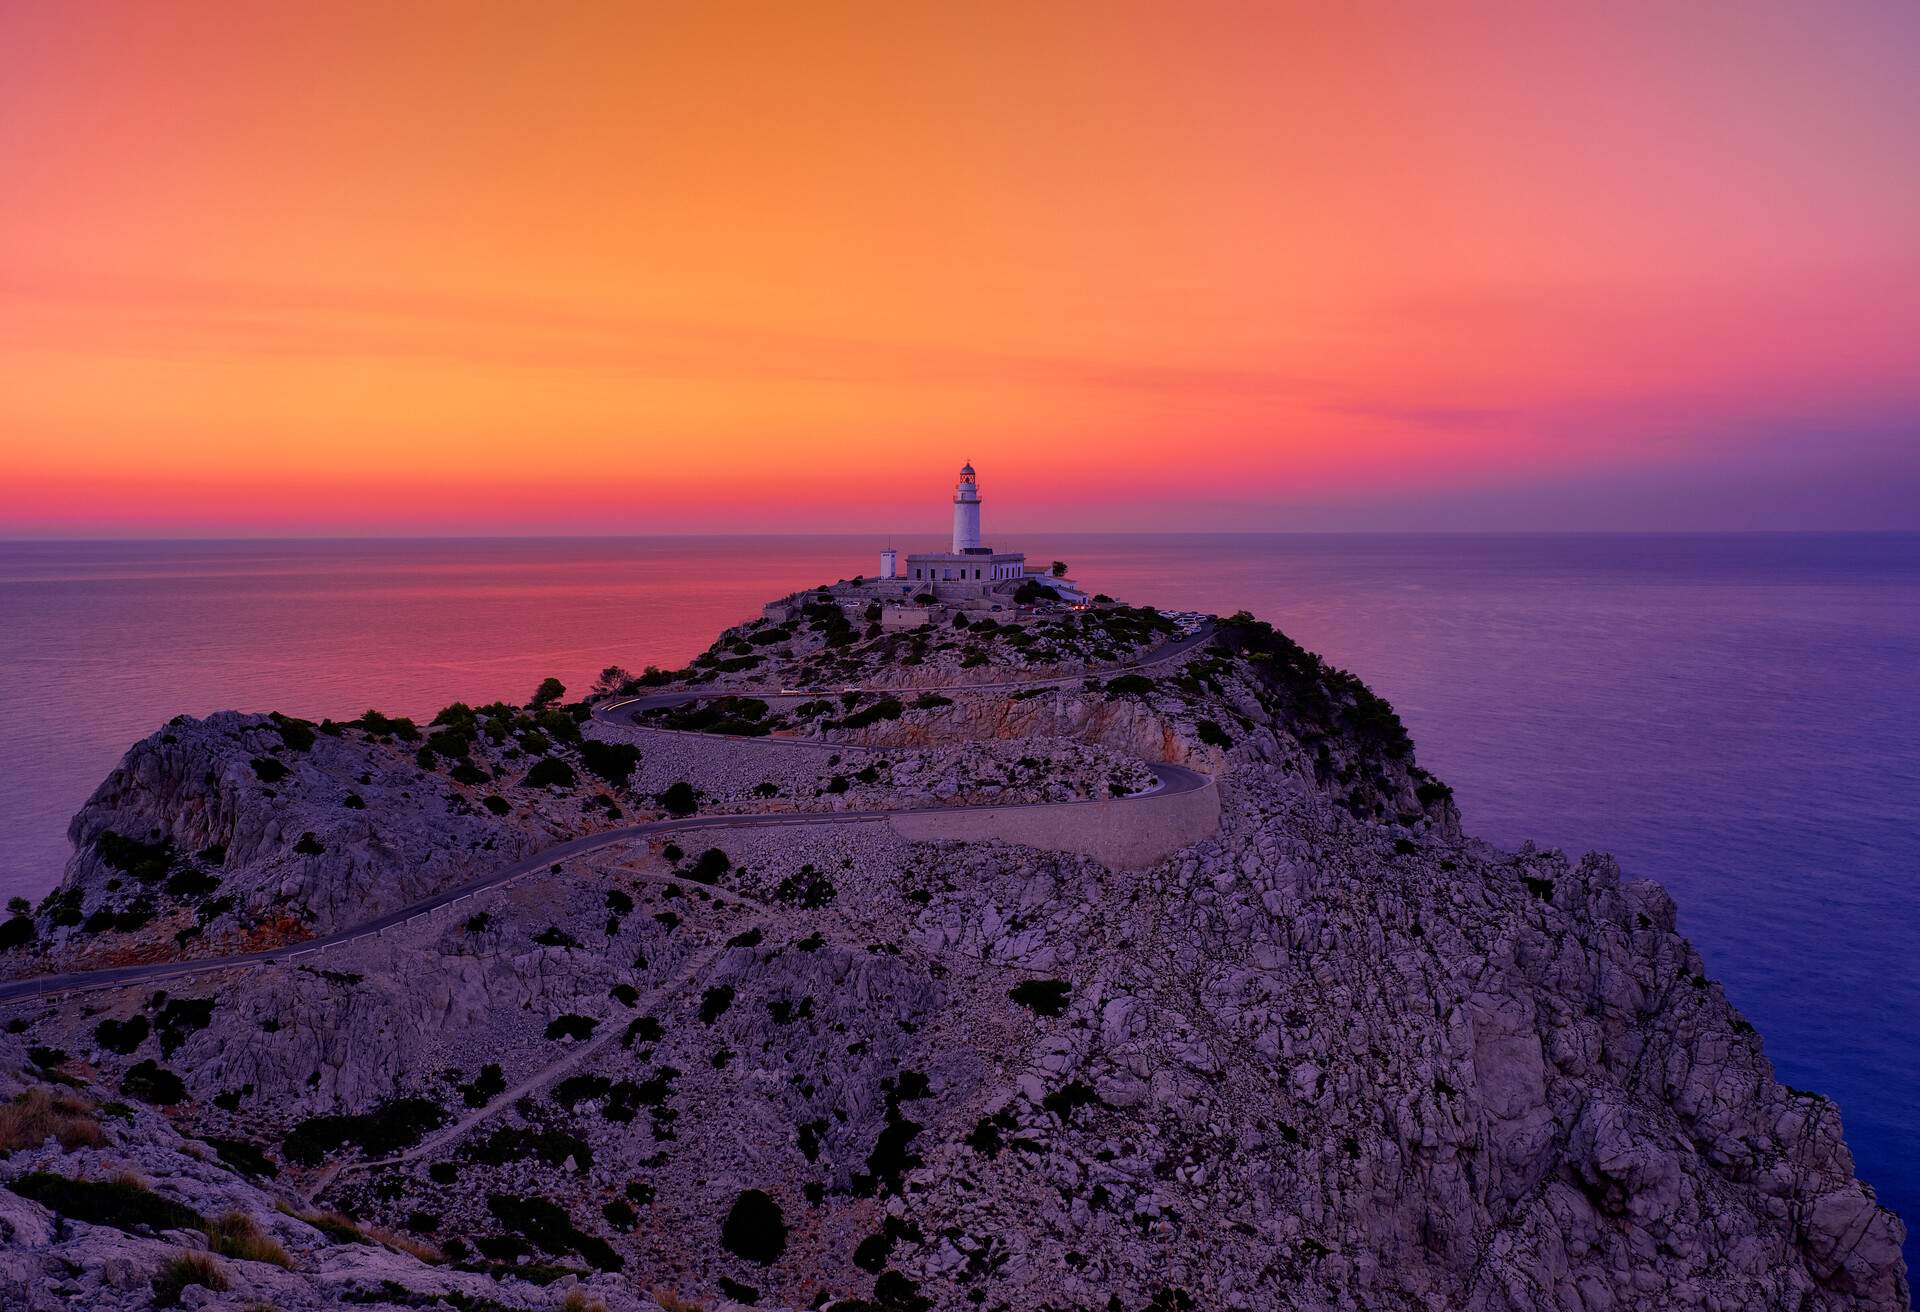 A lighthouse on top of a rocky mountain by the sea with a dramatic purple-orange sky.